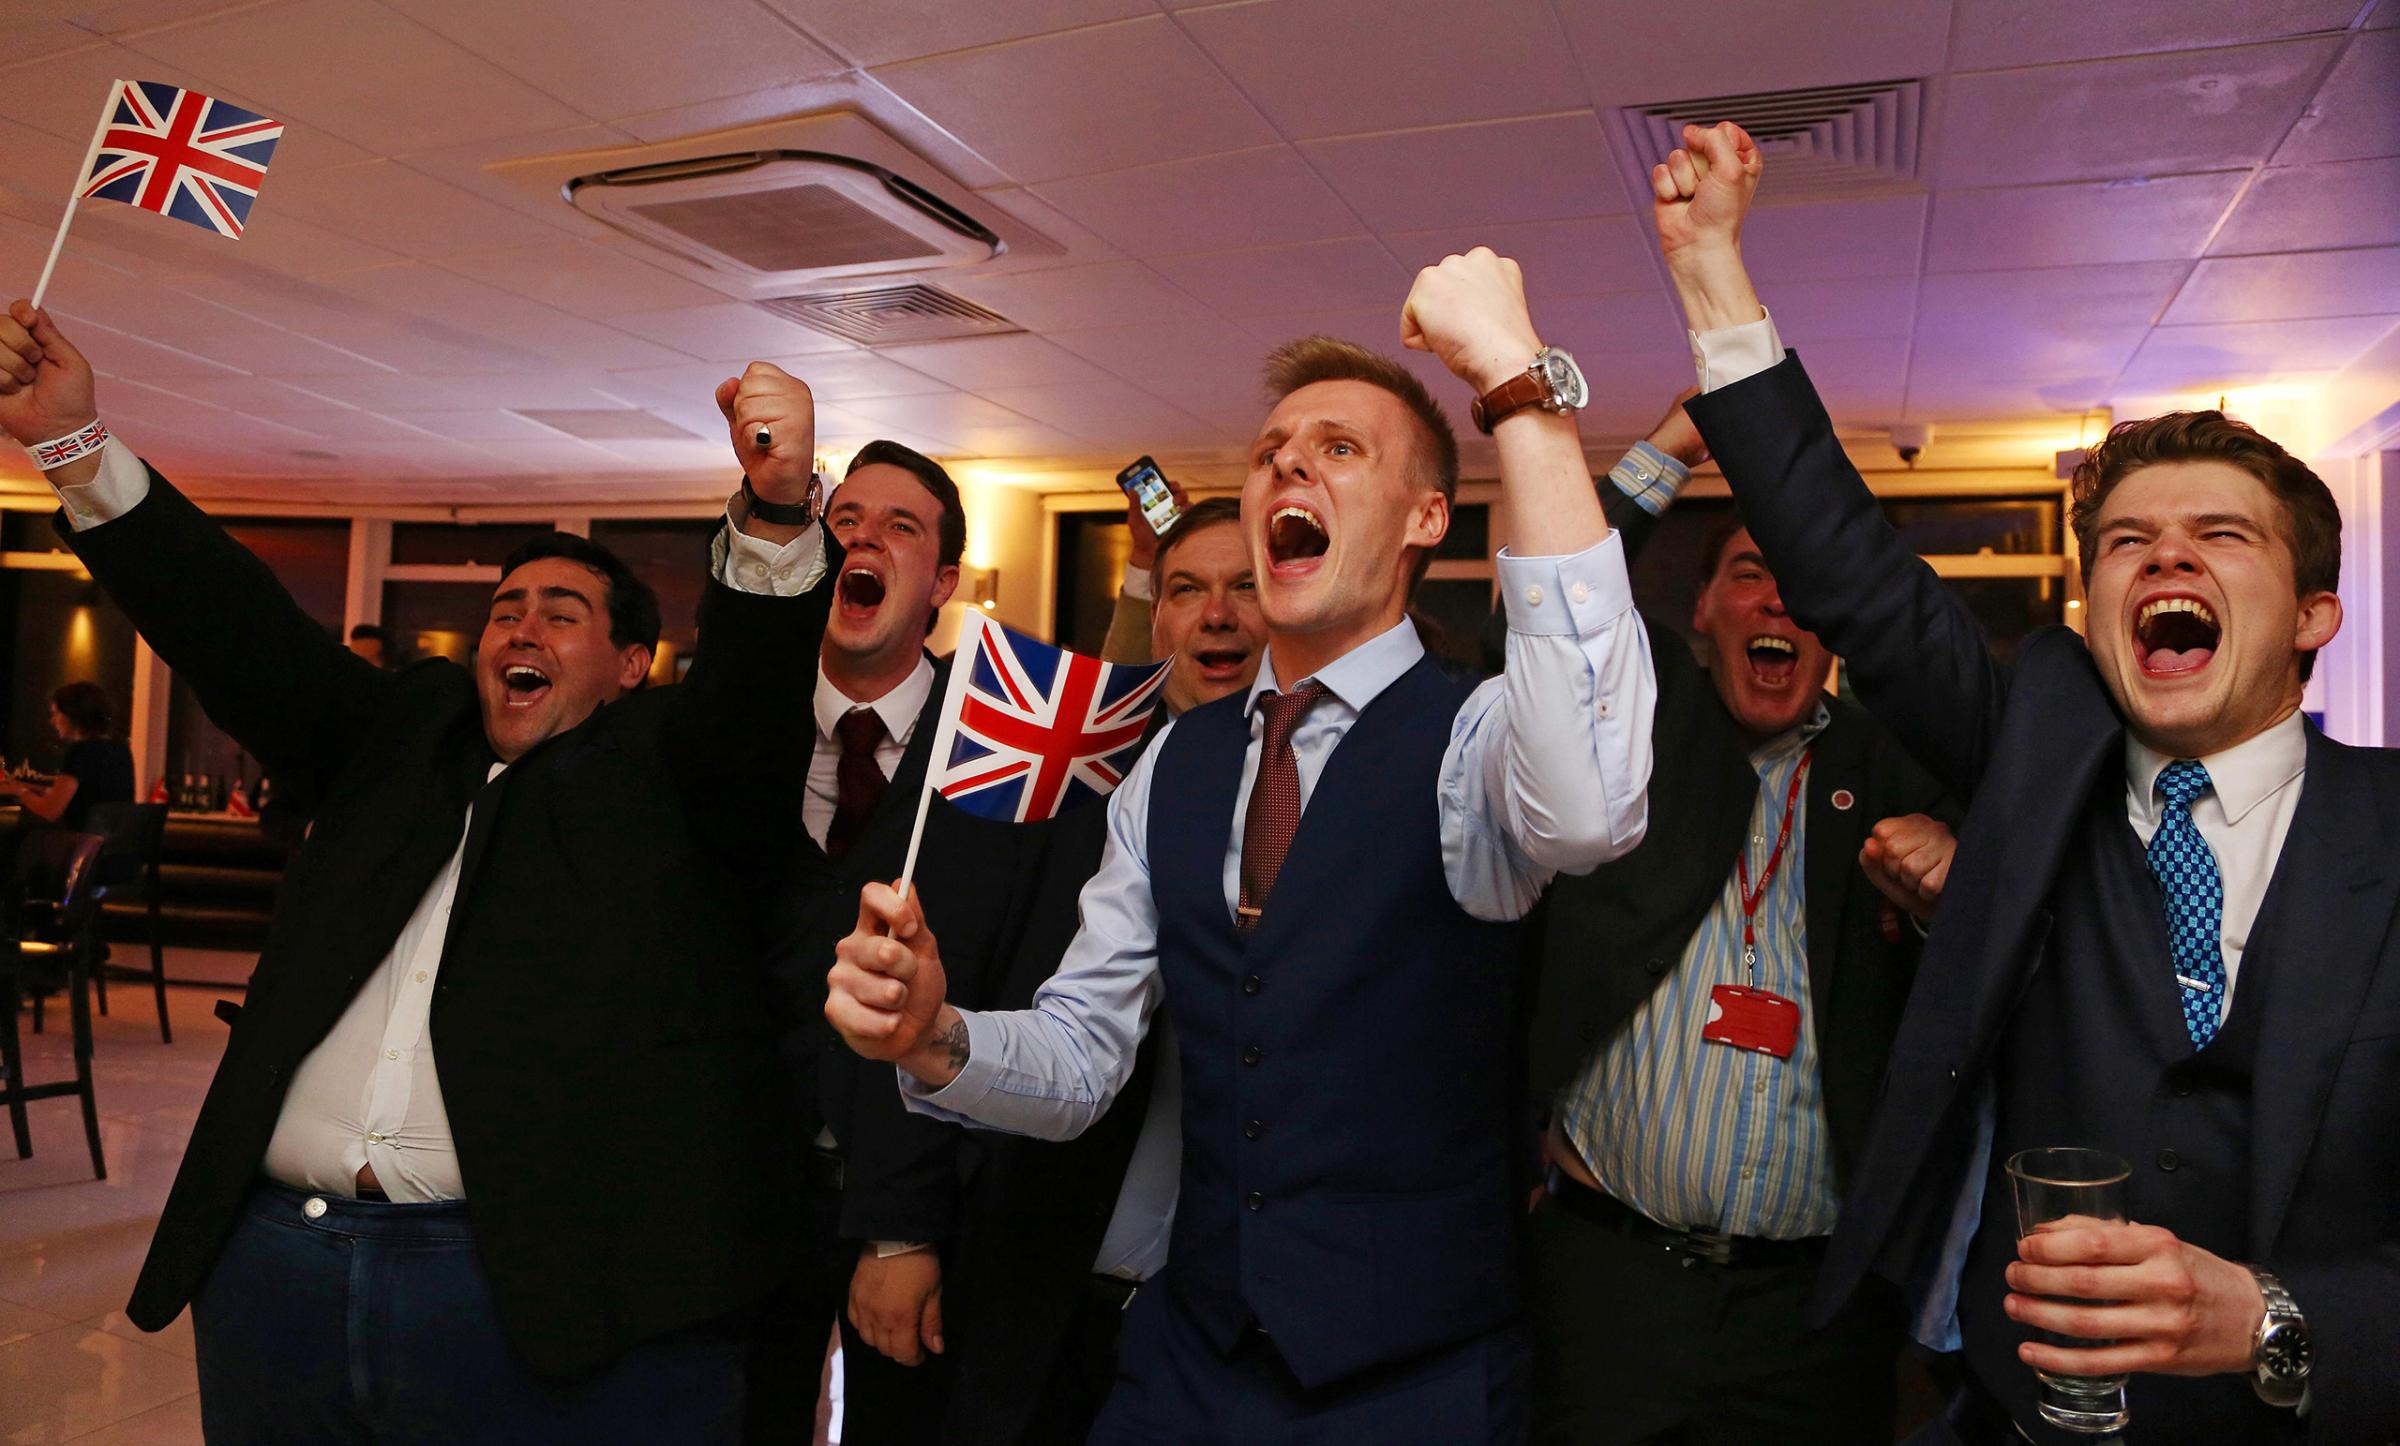 Vote Leave supporters cheer as the results come in at a referendum party at Millbank Tower in central London early on June 24, 2016.